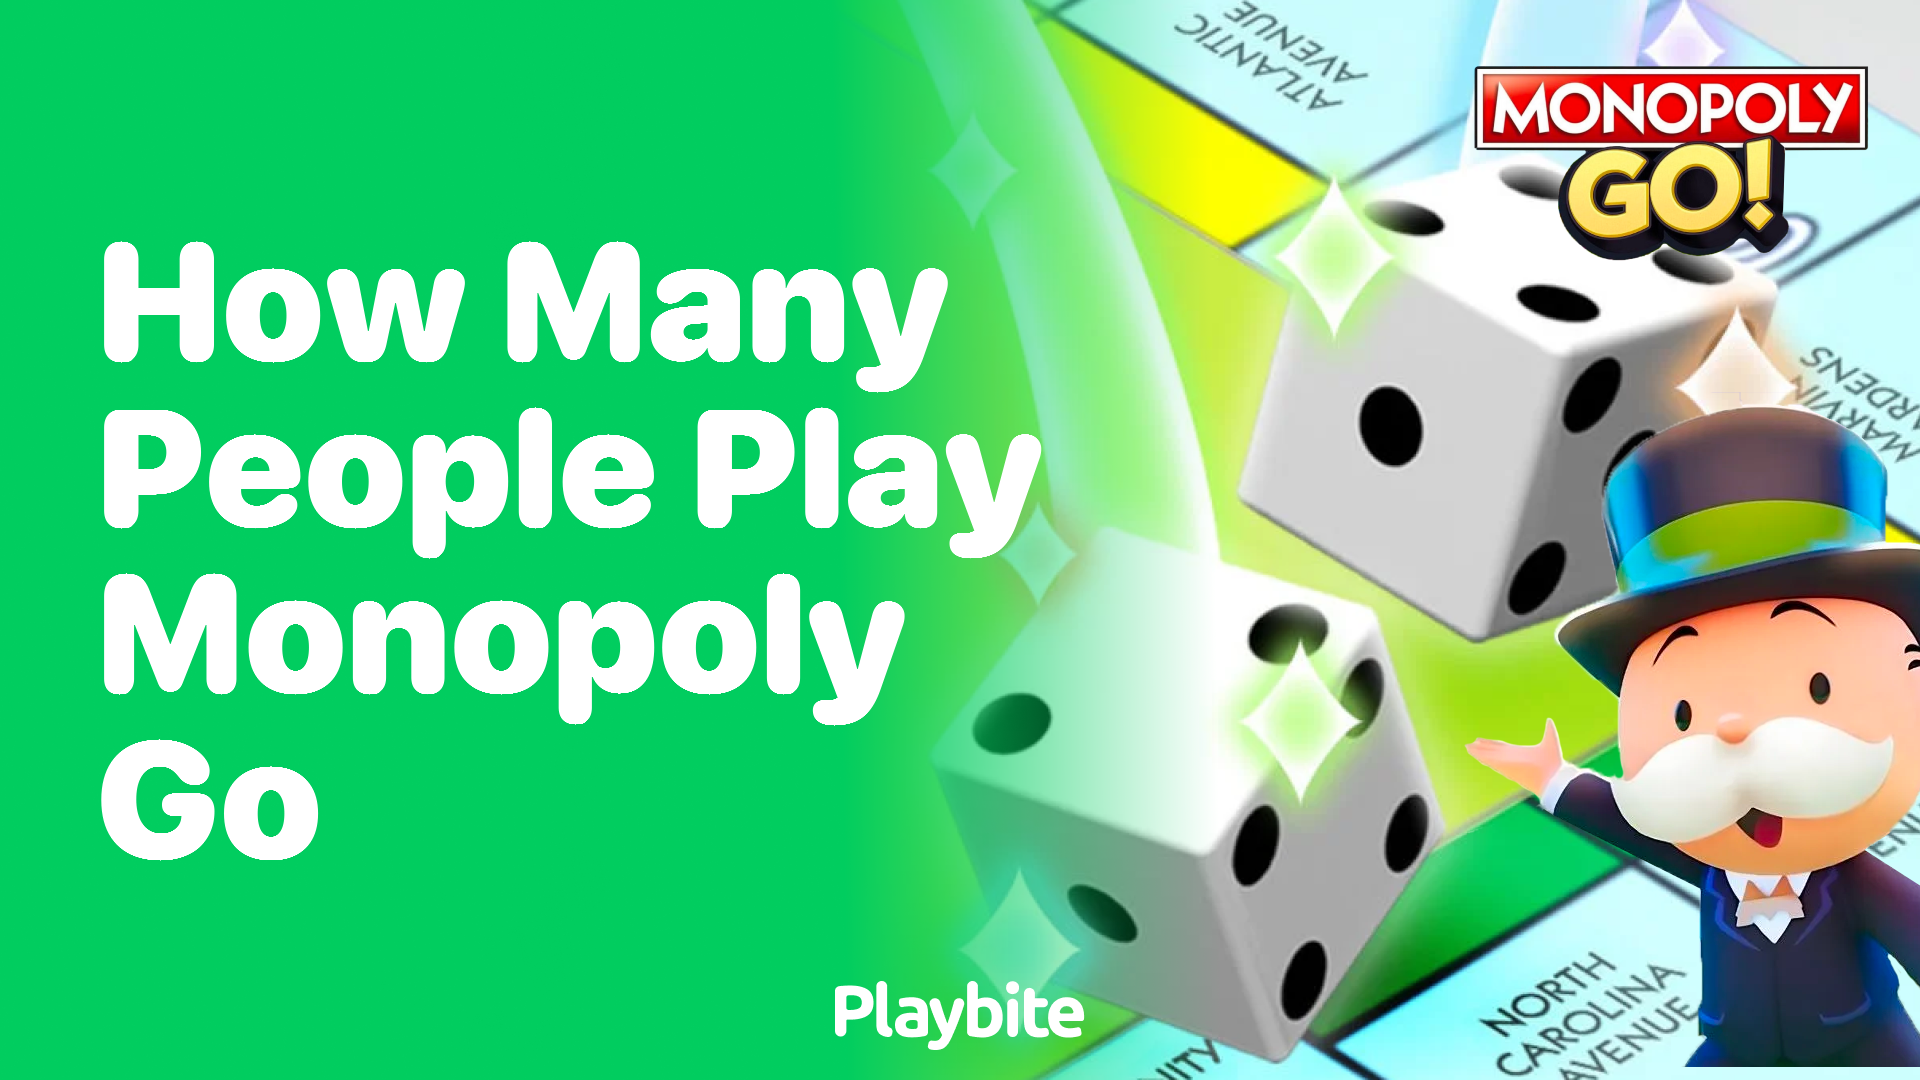 How Many People Play Monopoly Go?